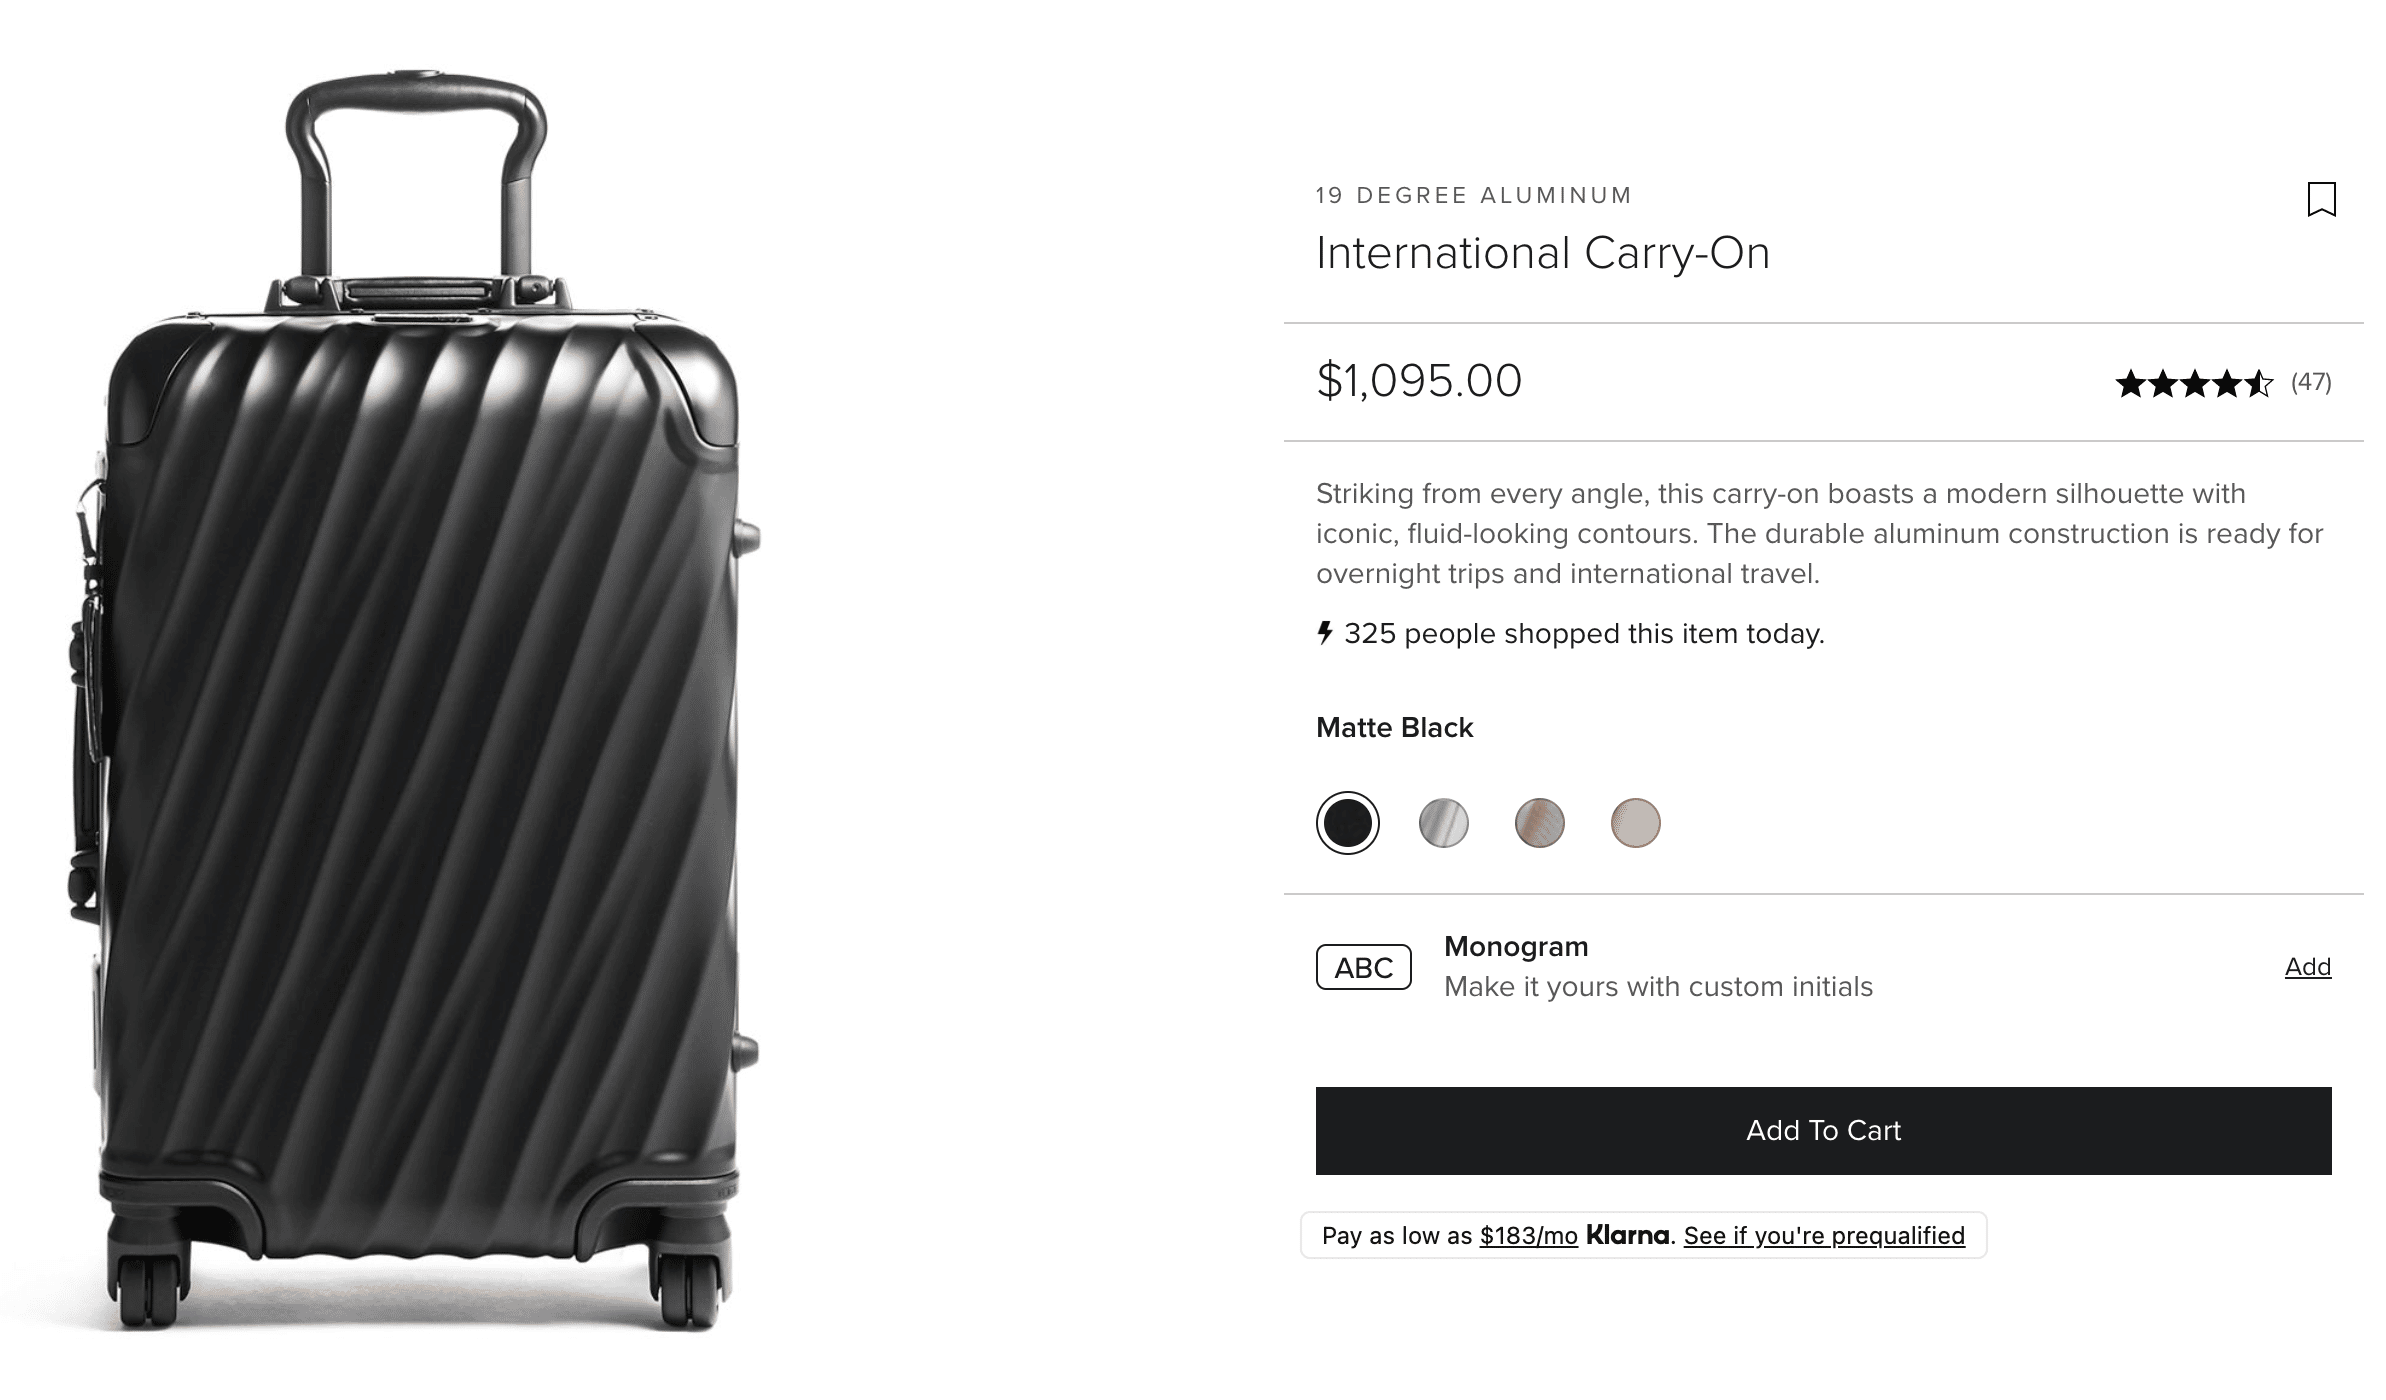 Tumi's premium suitcase demonstrates the value of appropriately pricing for e-commerce products online.